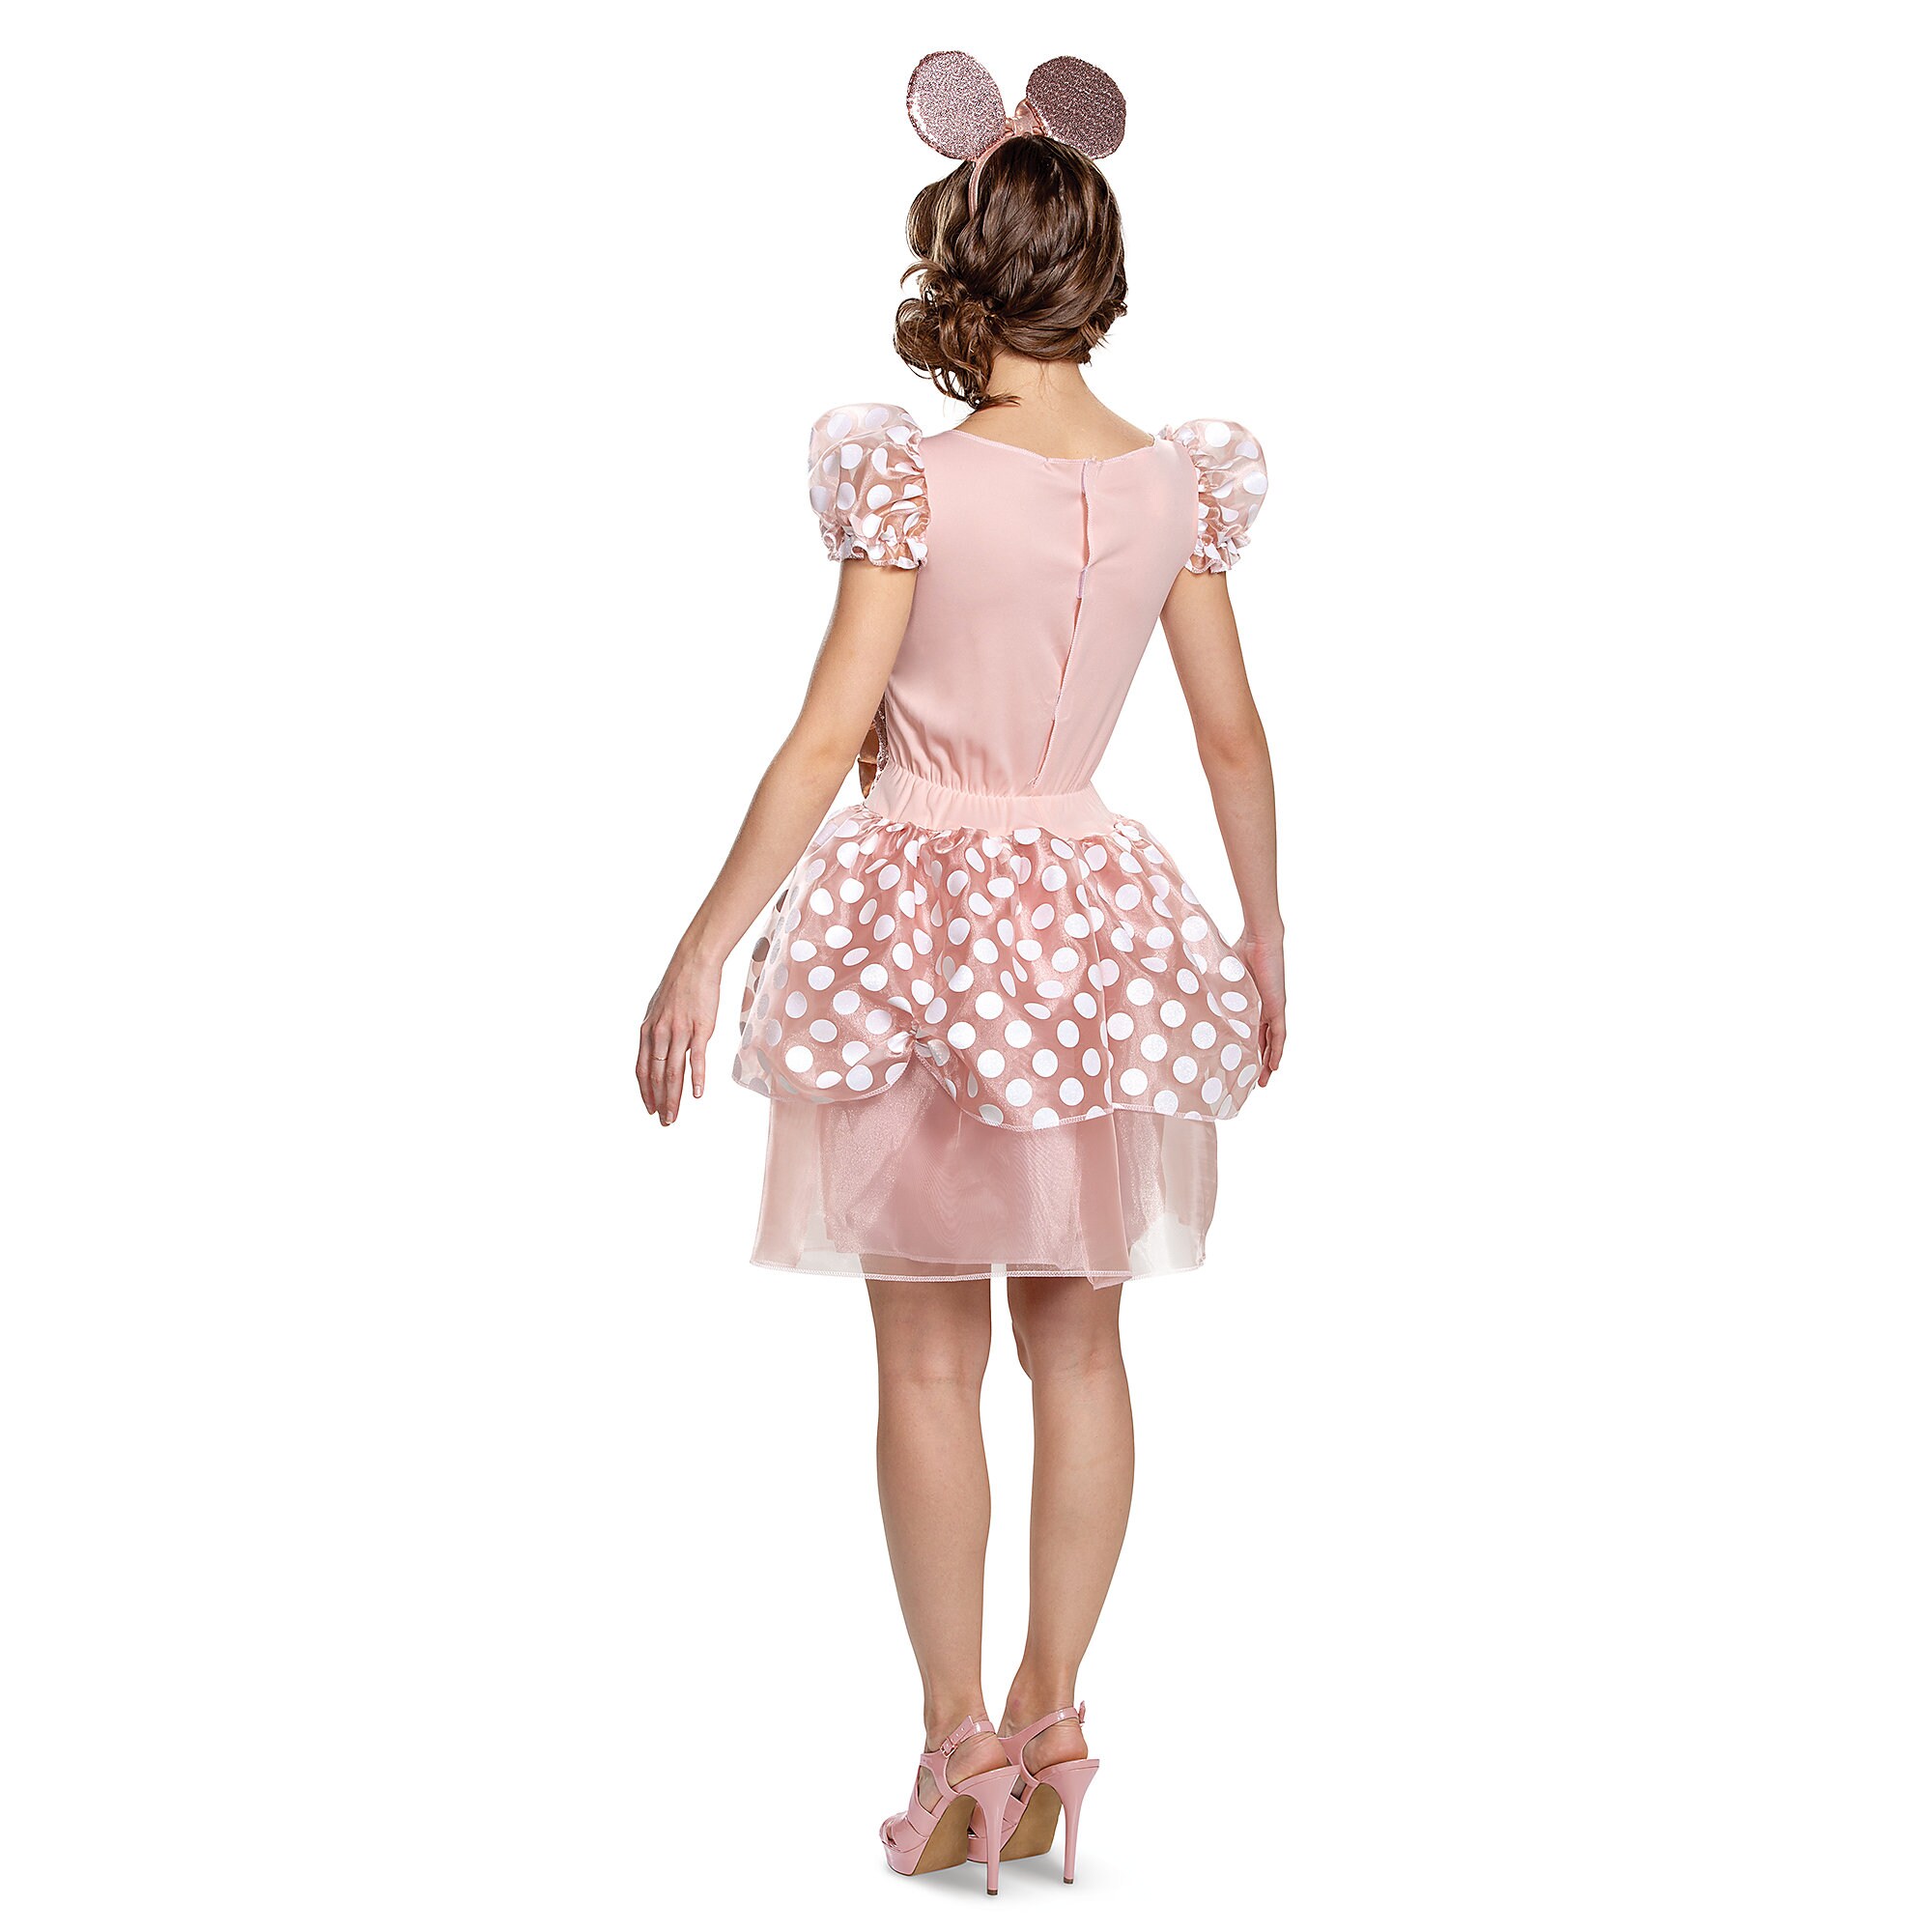 Minnie Mouse Rose Gold Costume for Adults by Disguise